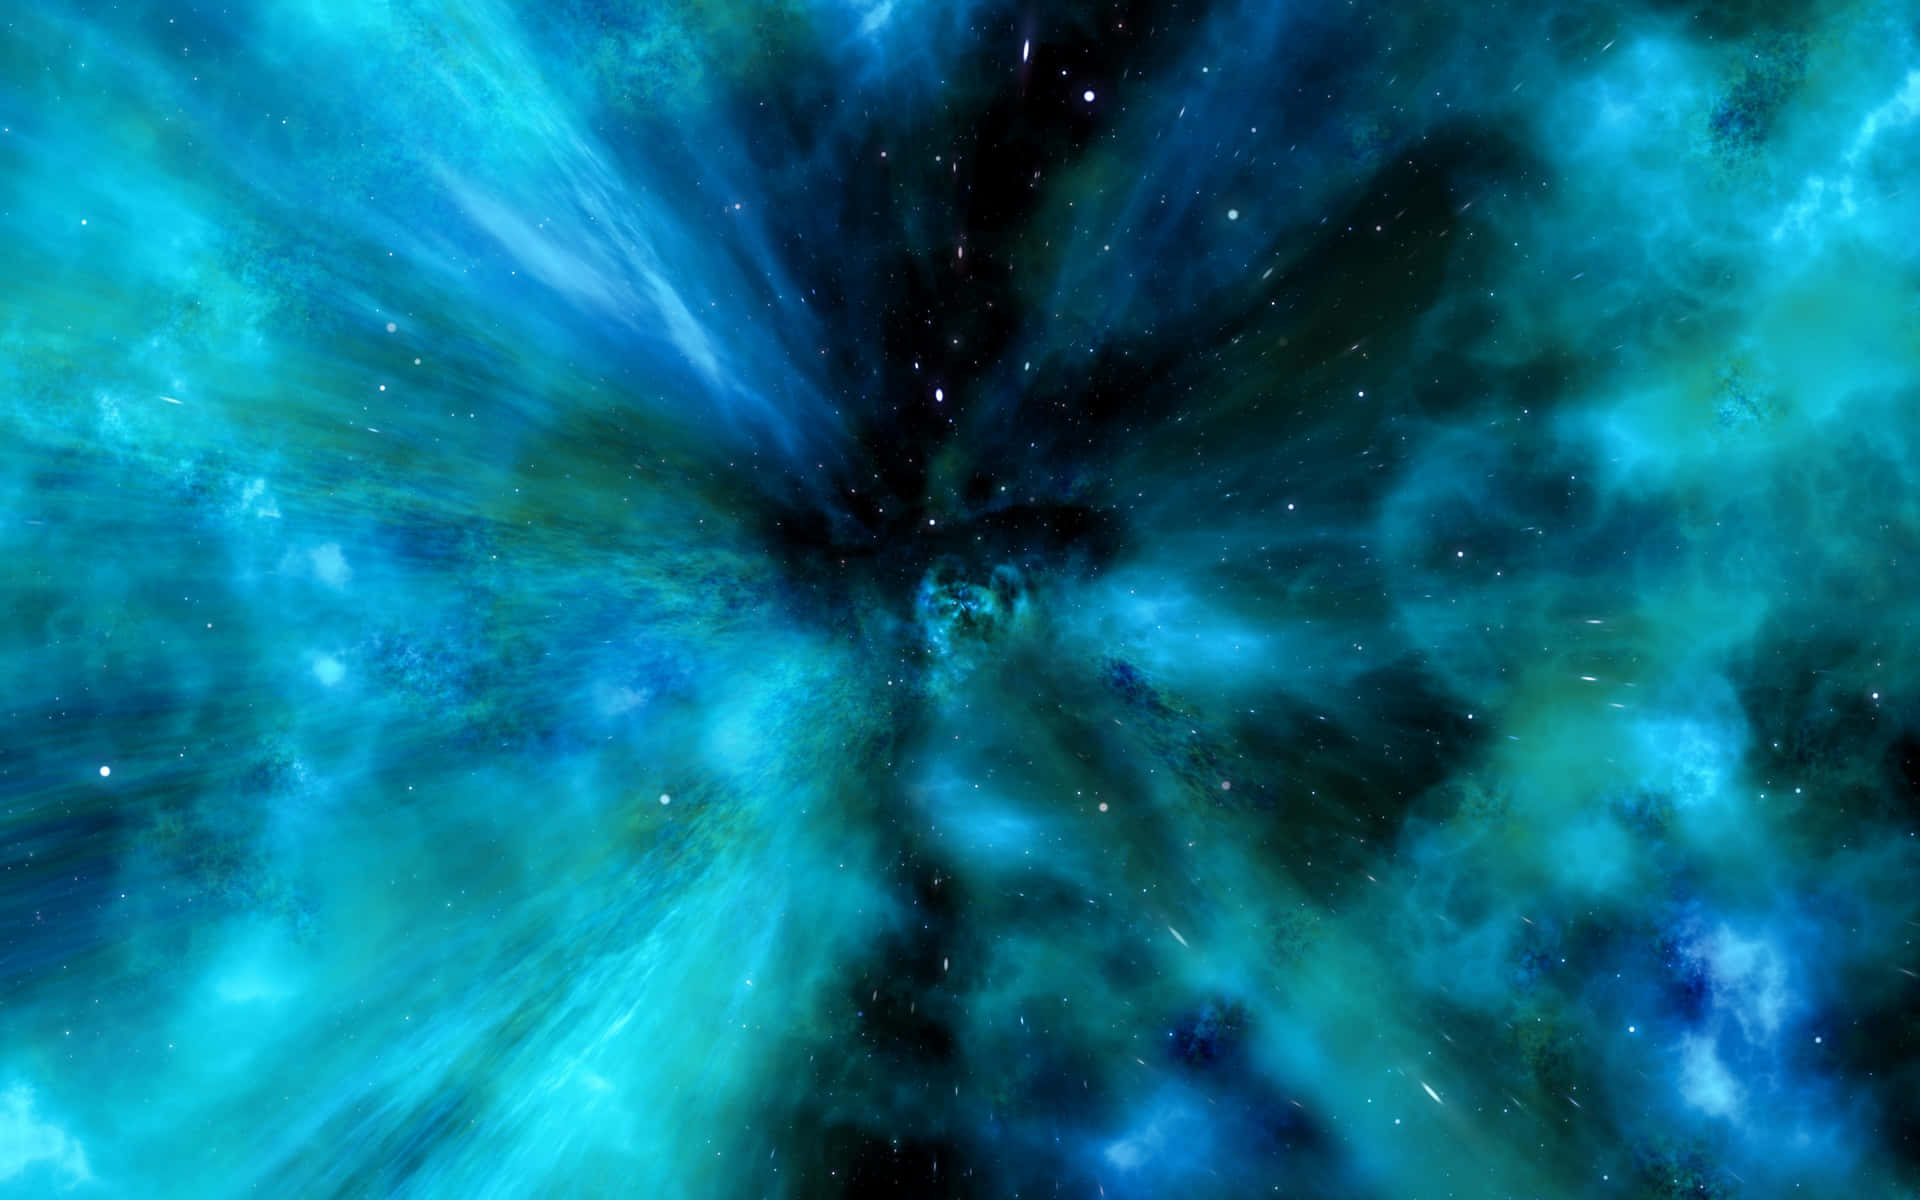 Explore the Universe and Get Lost in the Splendid Cosmic Abundance of the Green and Blue Galaxy Wallpaper